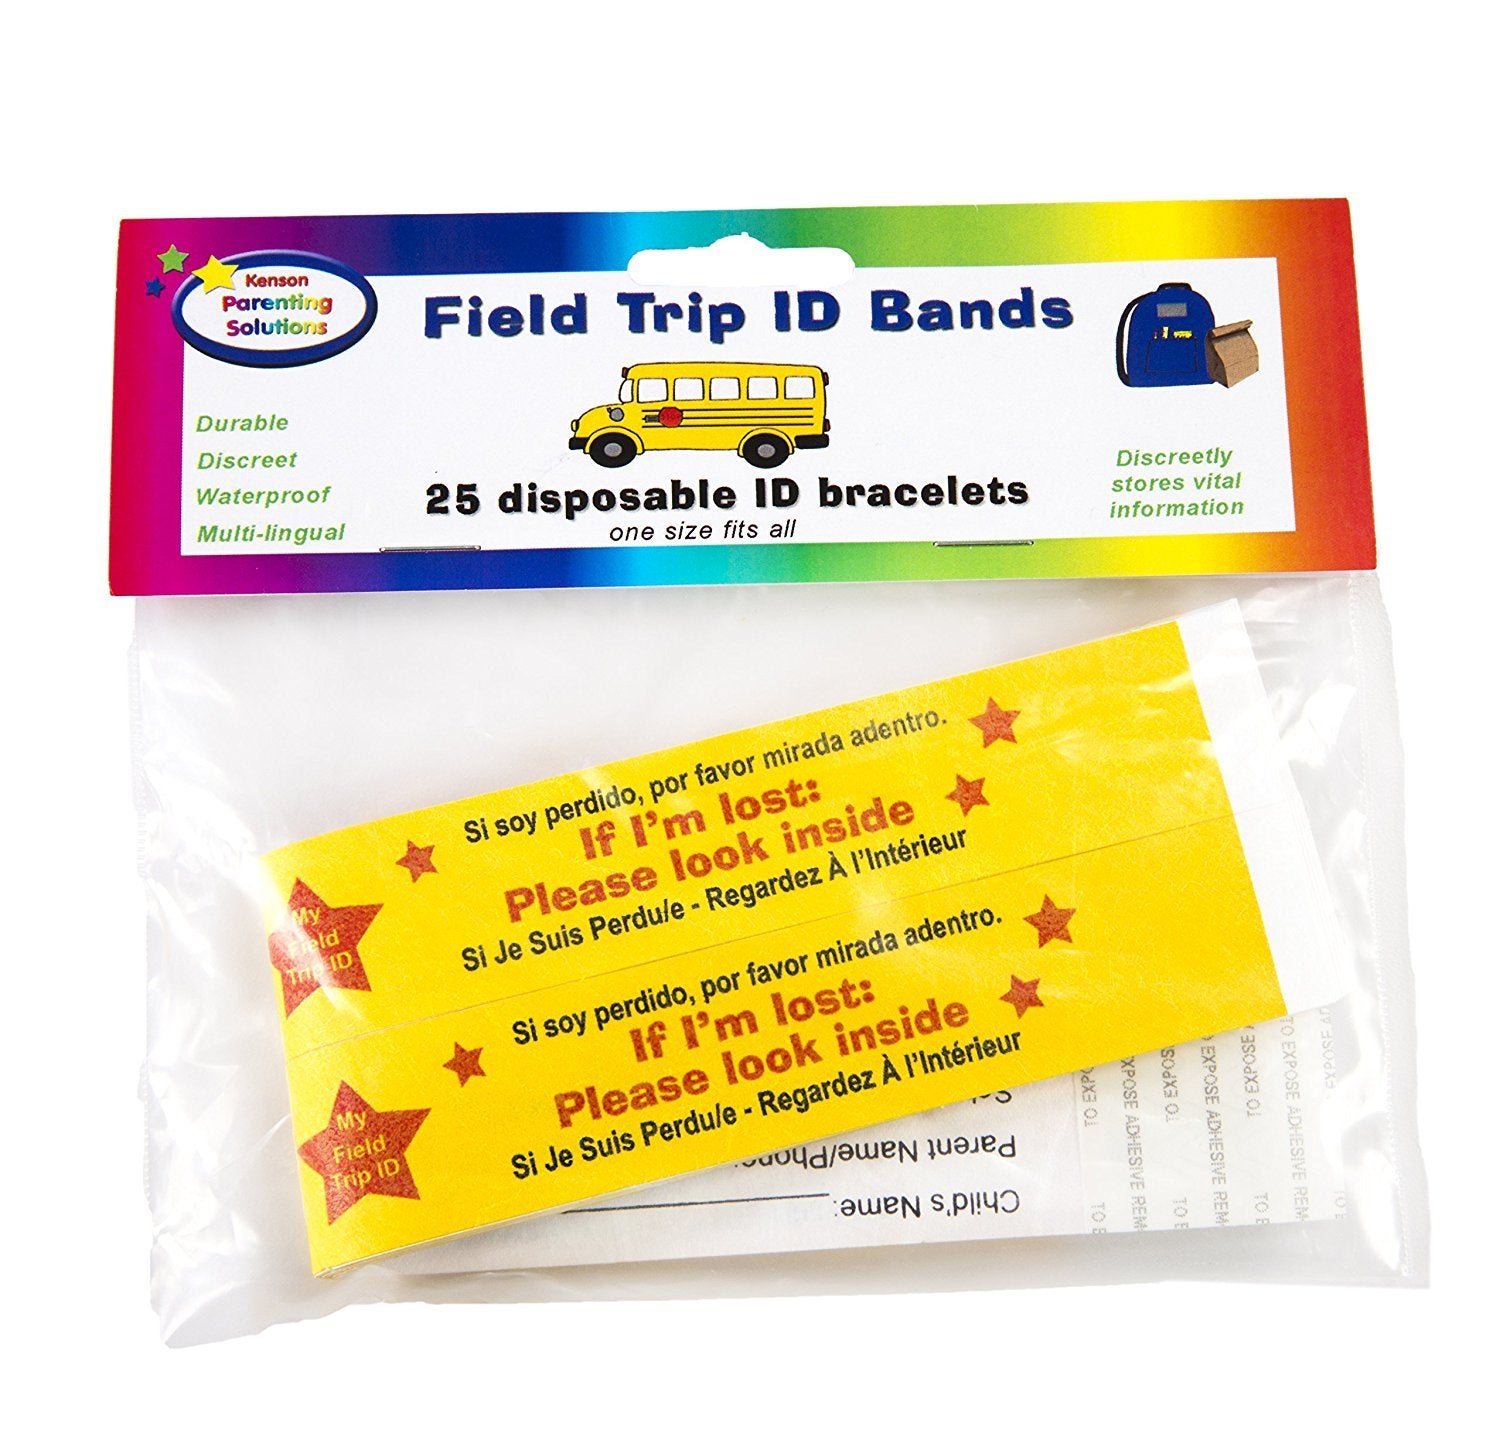 Safety ID band for lost kids